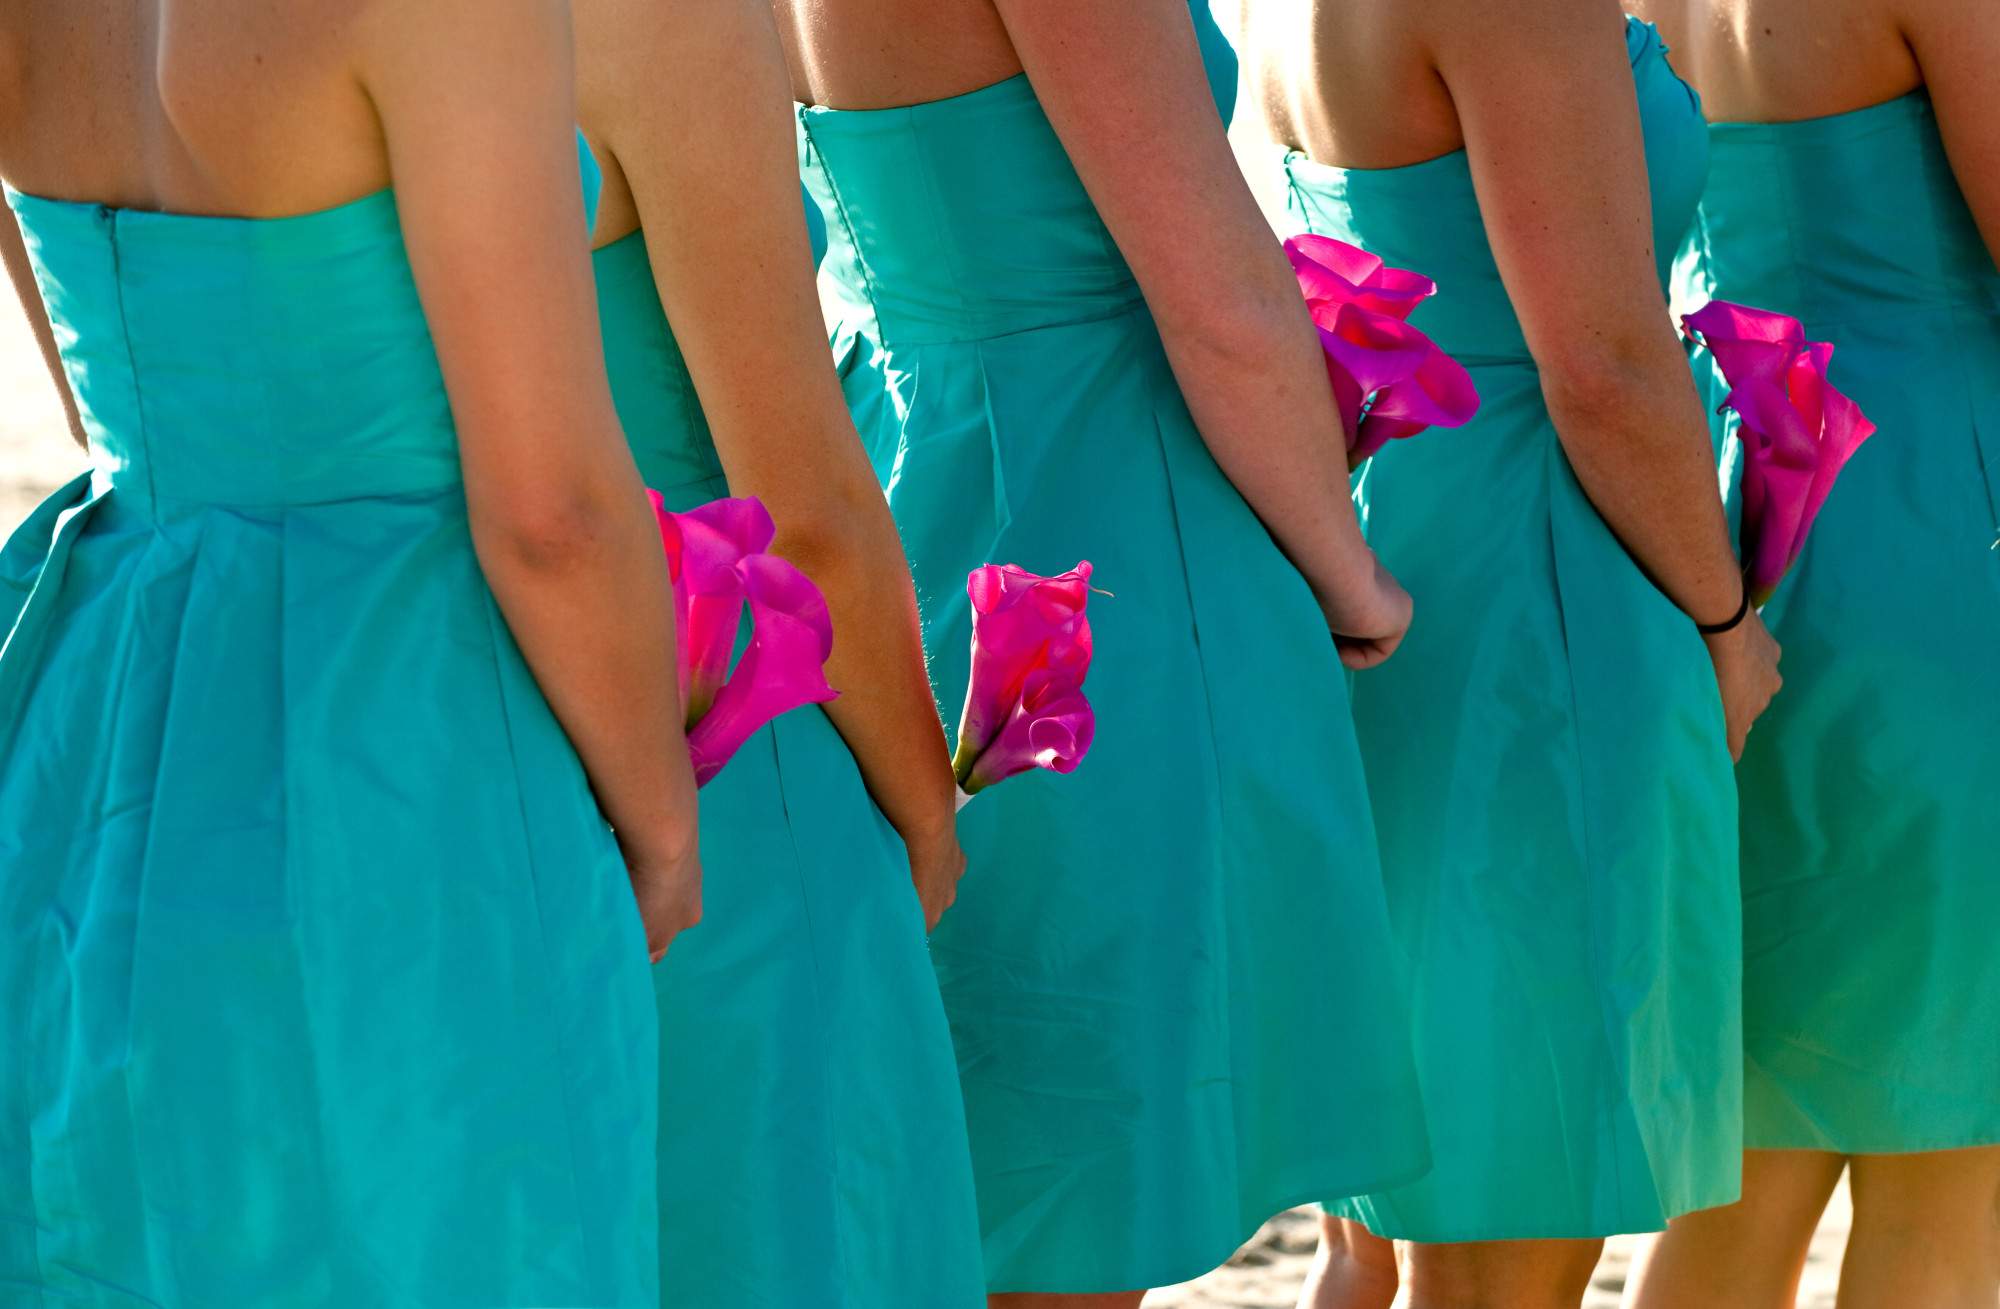 Top 3 Reasons You Should Definitely Give Bridesmaid Gifts